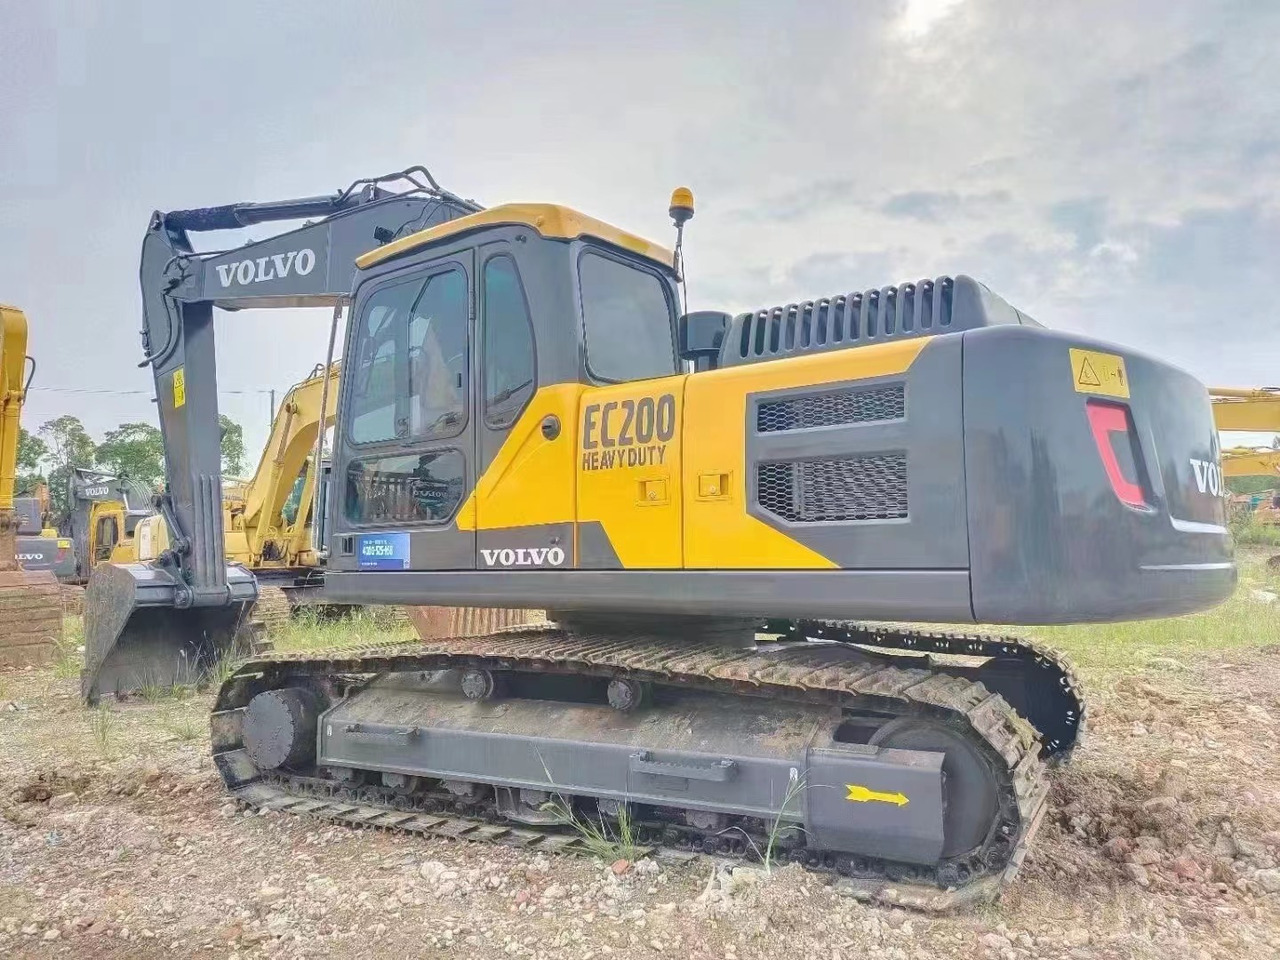 Used excavator VOLVO EC200, Large engineering construction machinery good condition on sale lizingą Used excavator VOLVO EC200, Large engineering construction machinery good condition on sale: foto 11